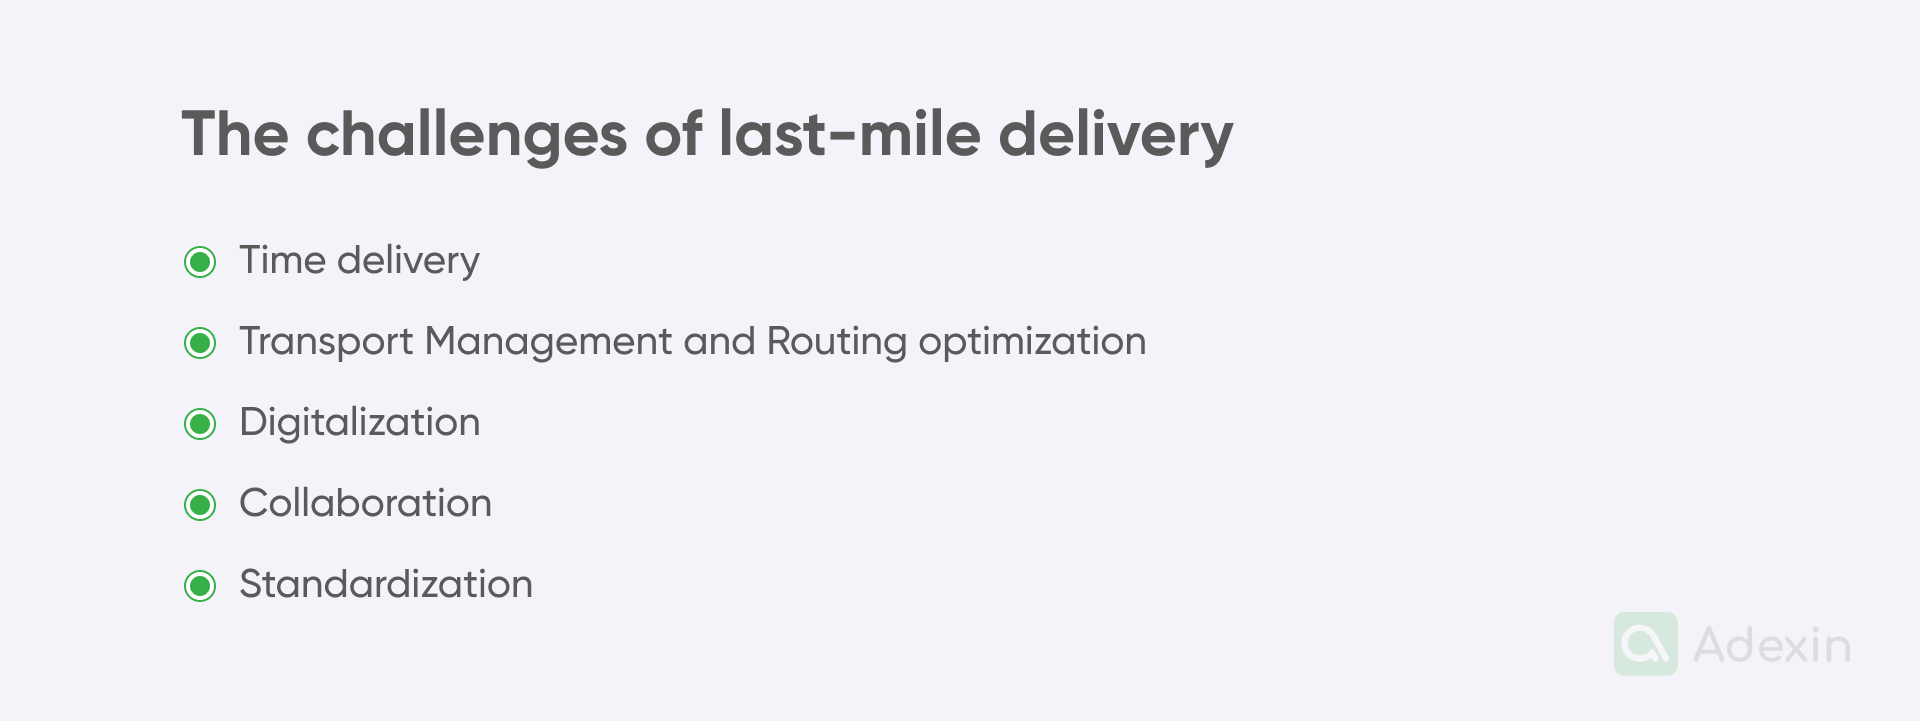 Elements of challenges of last-mile delivery